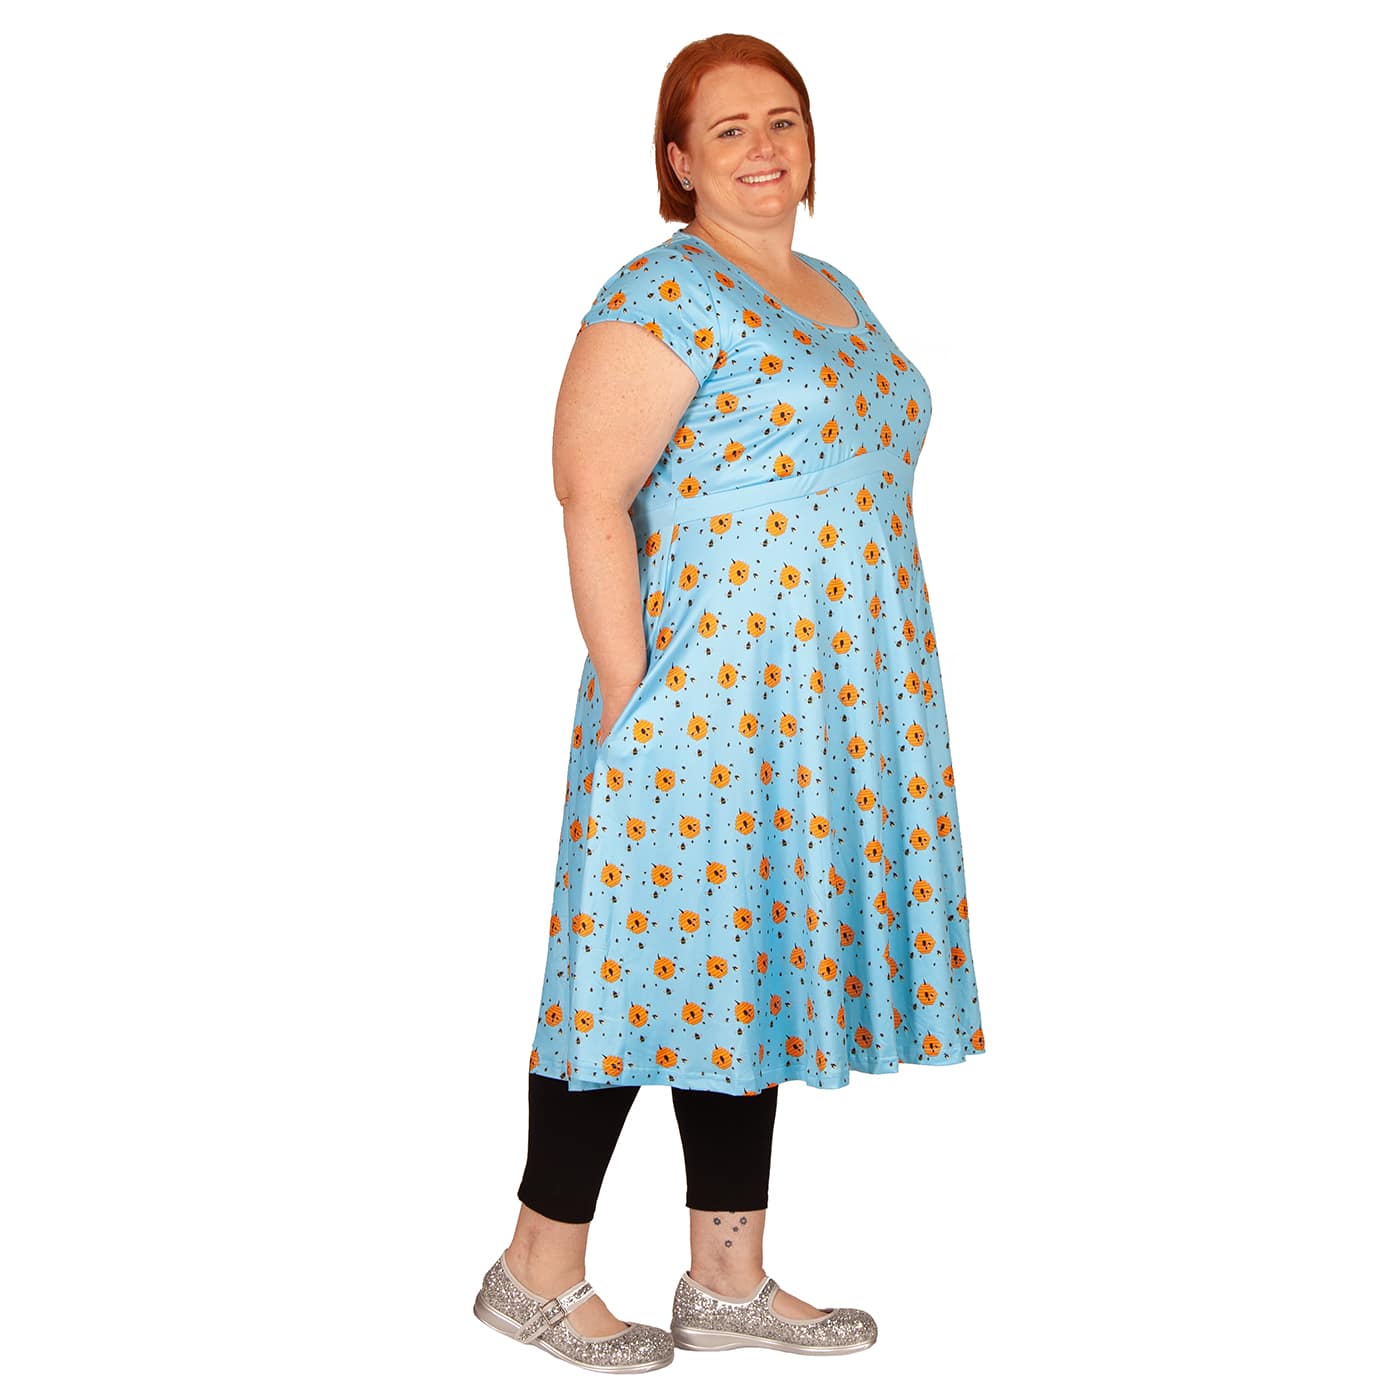 Hive Tea Dress by RainbowsAndFairies.com (Beehive - Bees - Bumblebee - Honey - Dress With Pockets - Rockabilly - Vintage Inspired - Rock & Roll) - SKU: CL_TEADR_BHIVE_ORG - Pic 08